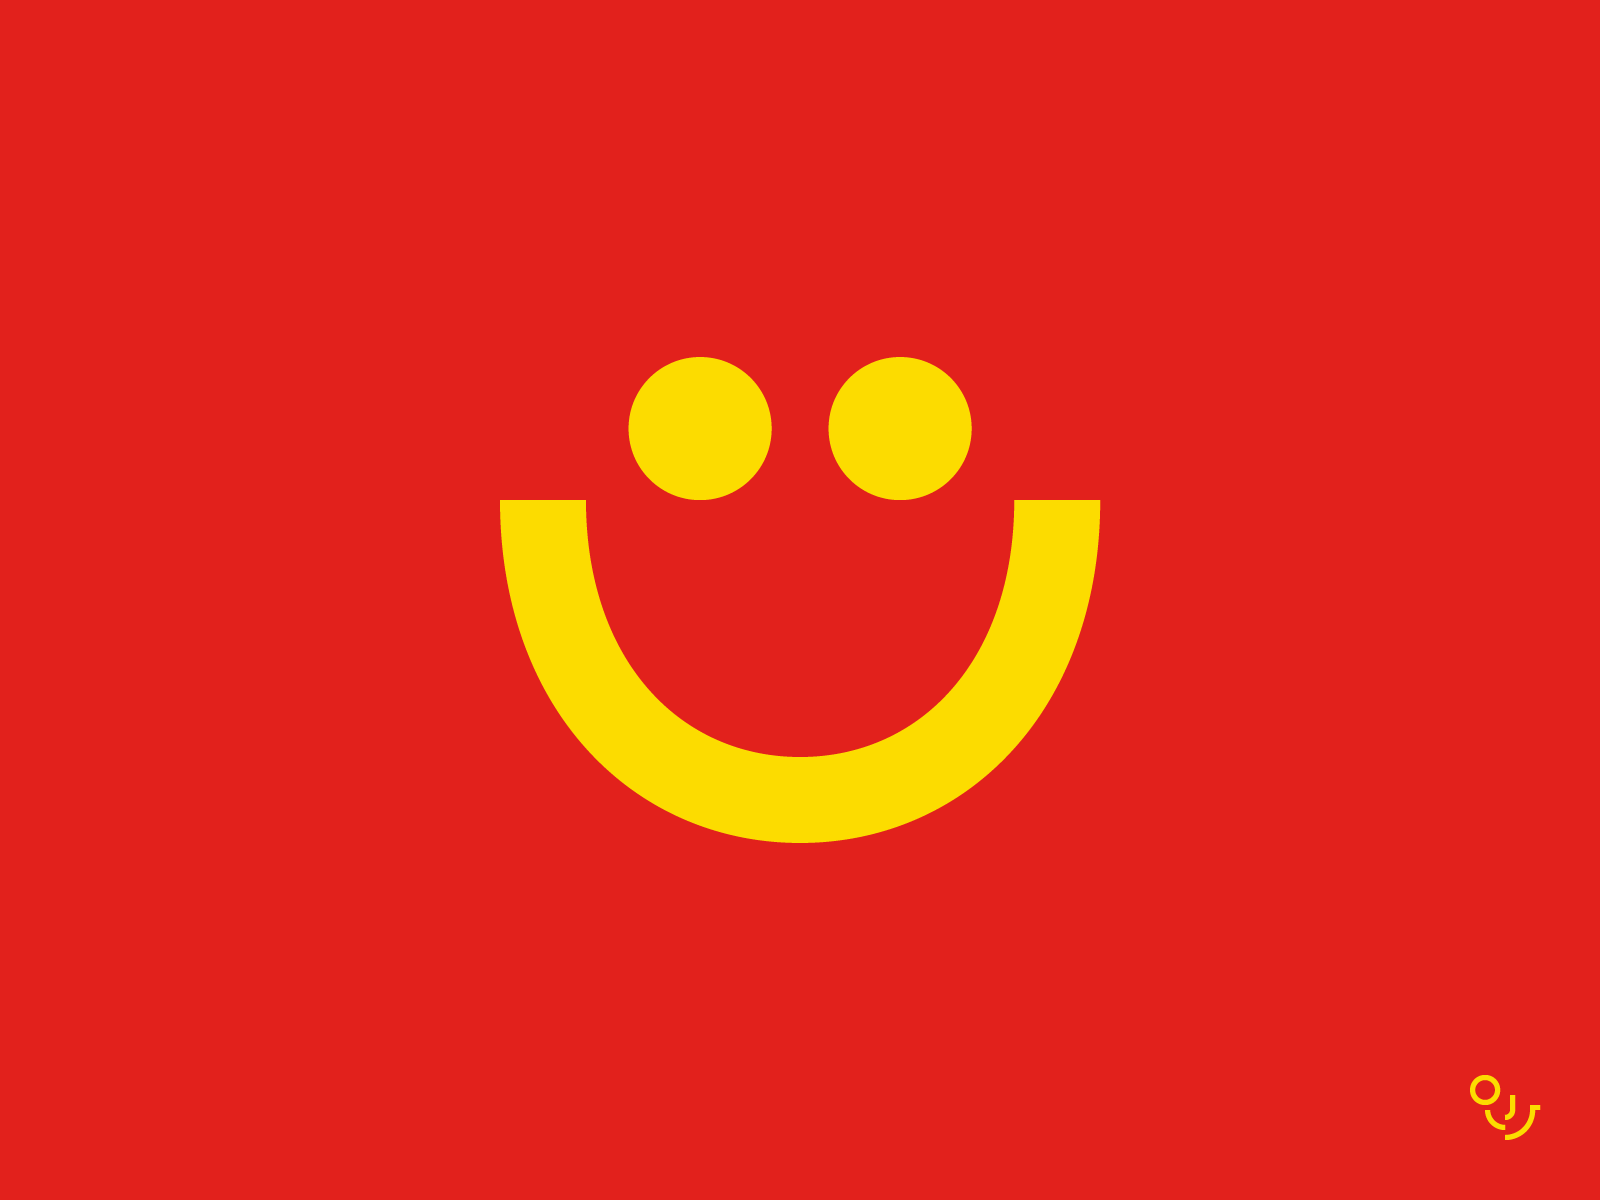 HD wallpaper: Smiley Happy, yellow emoji, 3d and abstract | Wallpaper Flare